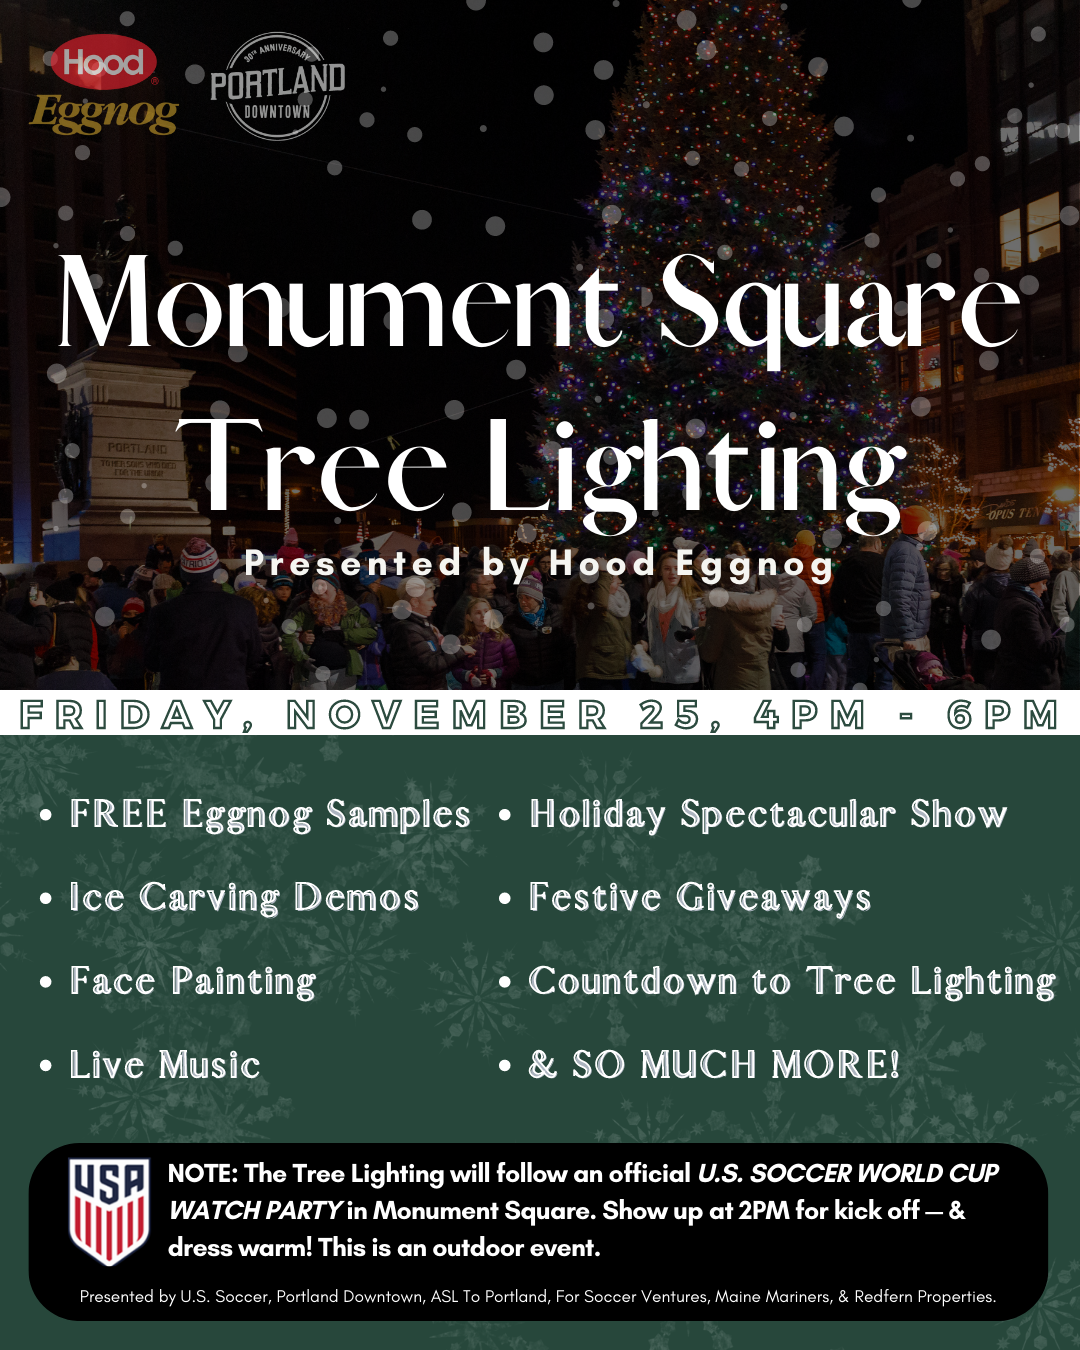 Monument Square Tree Lighting Presented by Hood Eggnog Portland Downtown